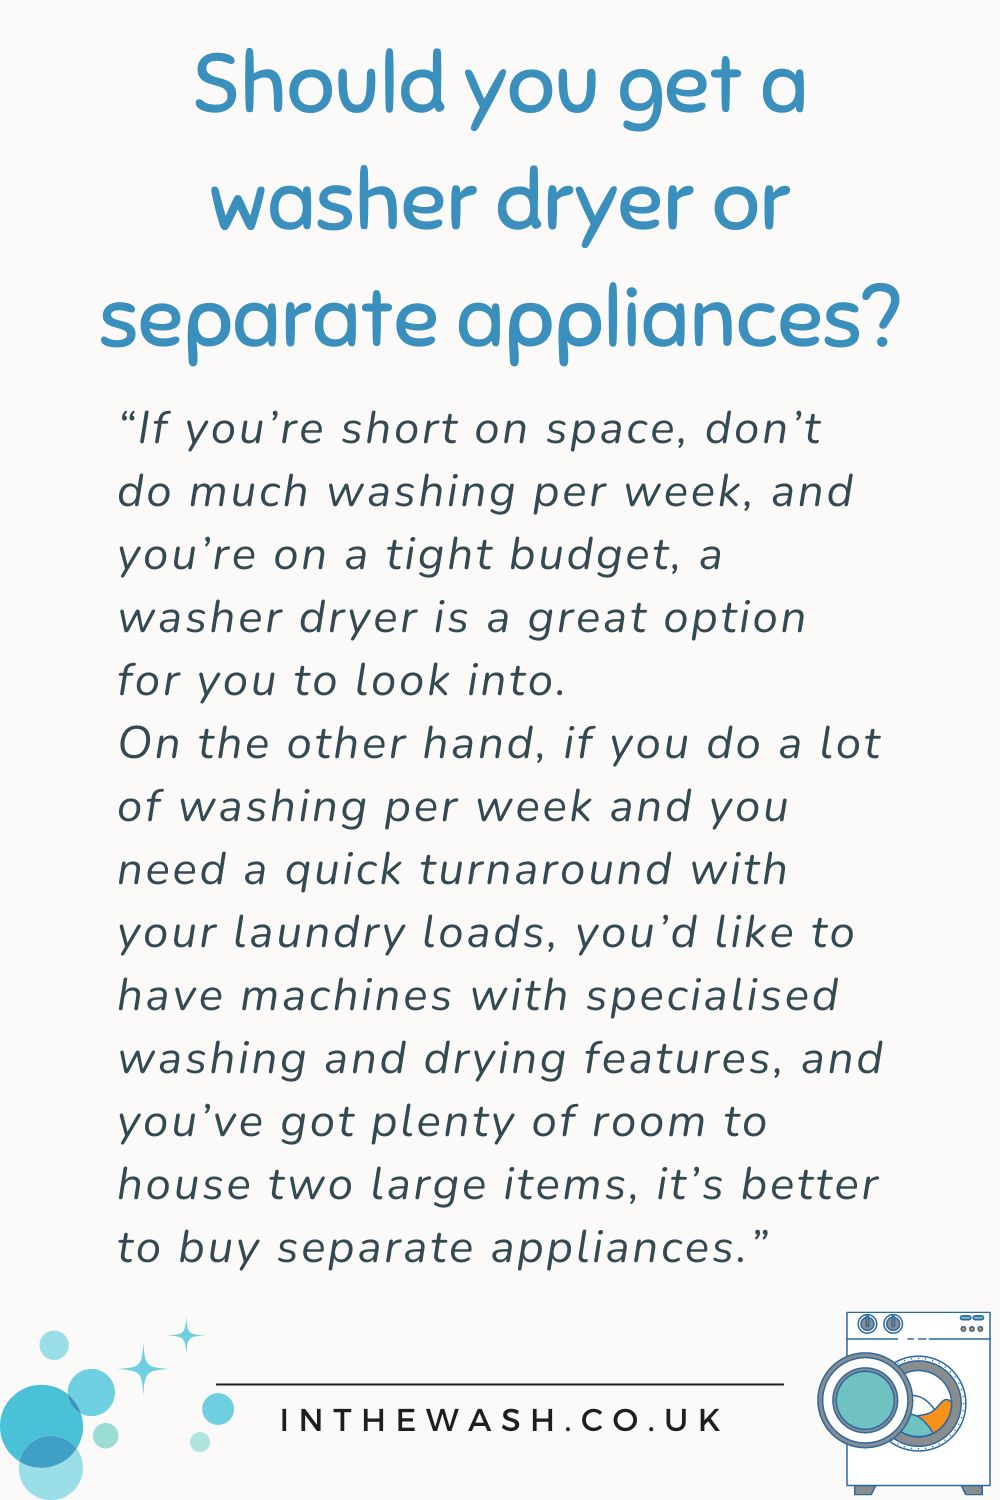 Should you get a washer dryer or separate appliances?